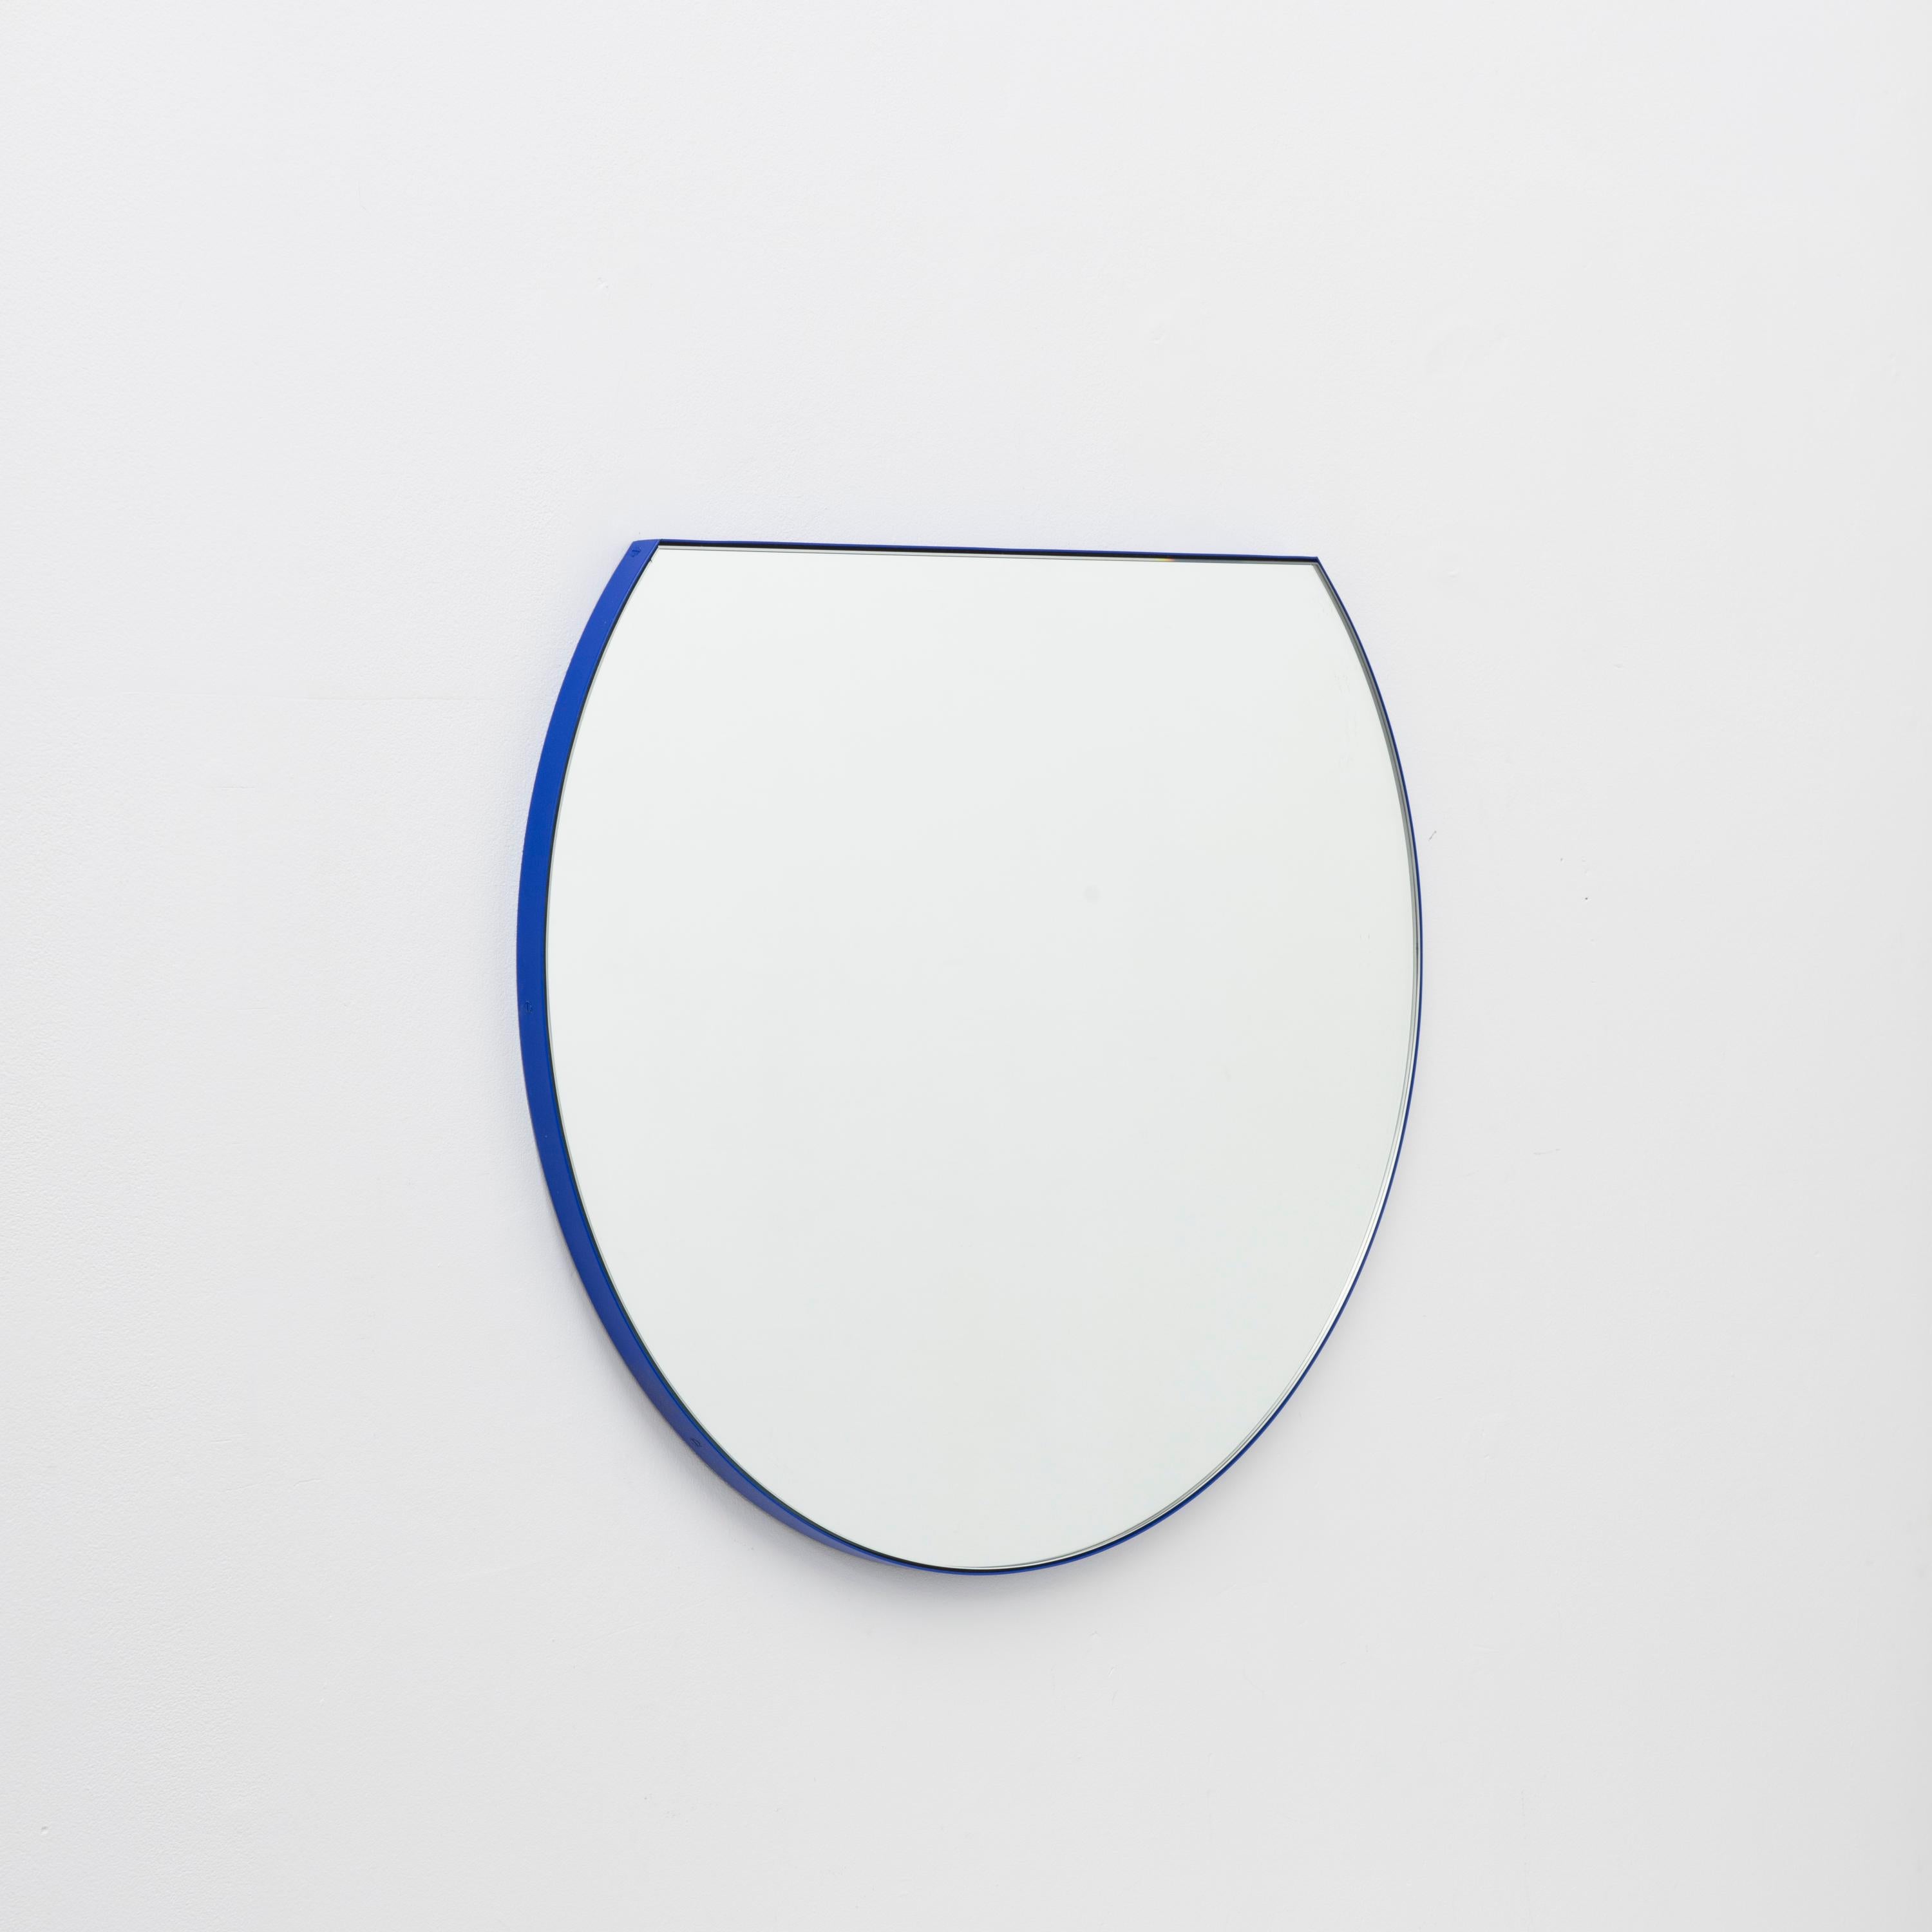 Modern Orbis Trecus™ D shaped round mirror with a minimalist powder coated aluminium blue frame. Fitted with a quality hanging system for a flexible installation in 4 different directions. Designed and handcrafted in London, UK.

Our mirrors are